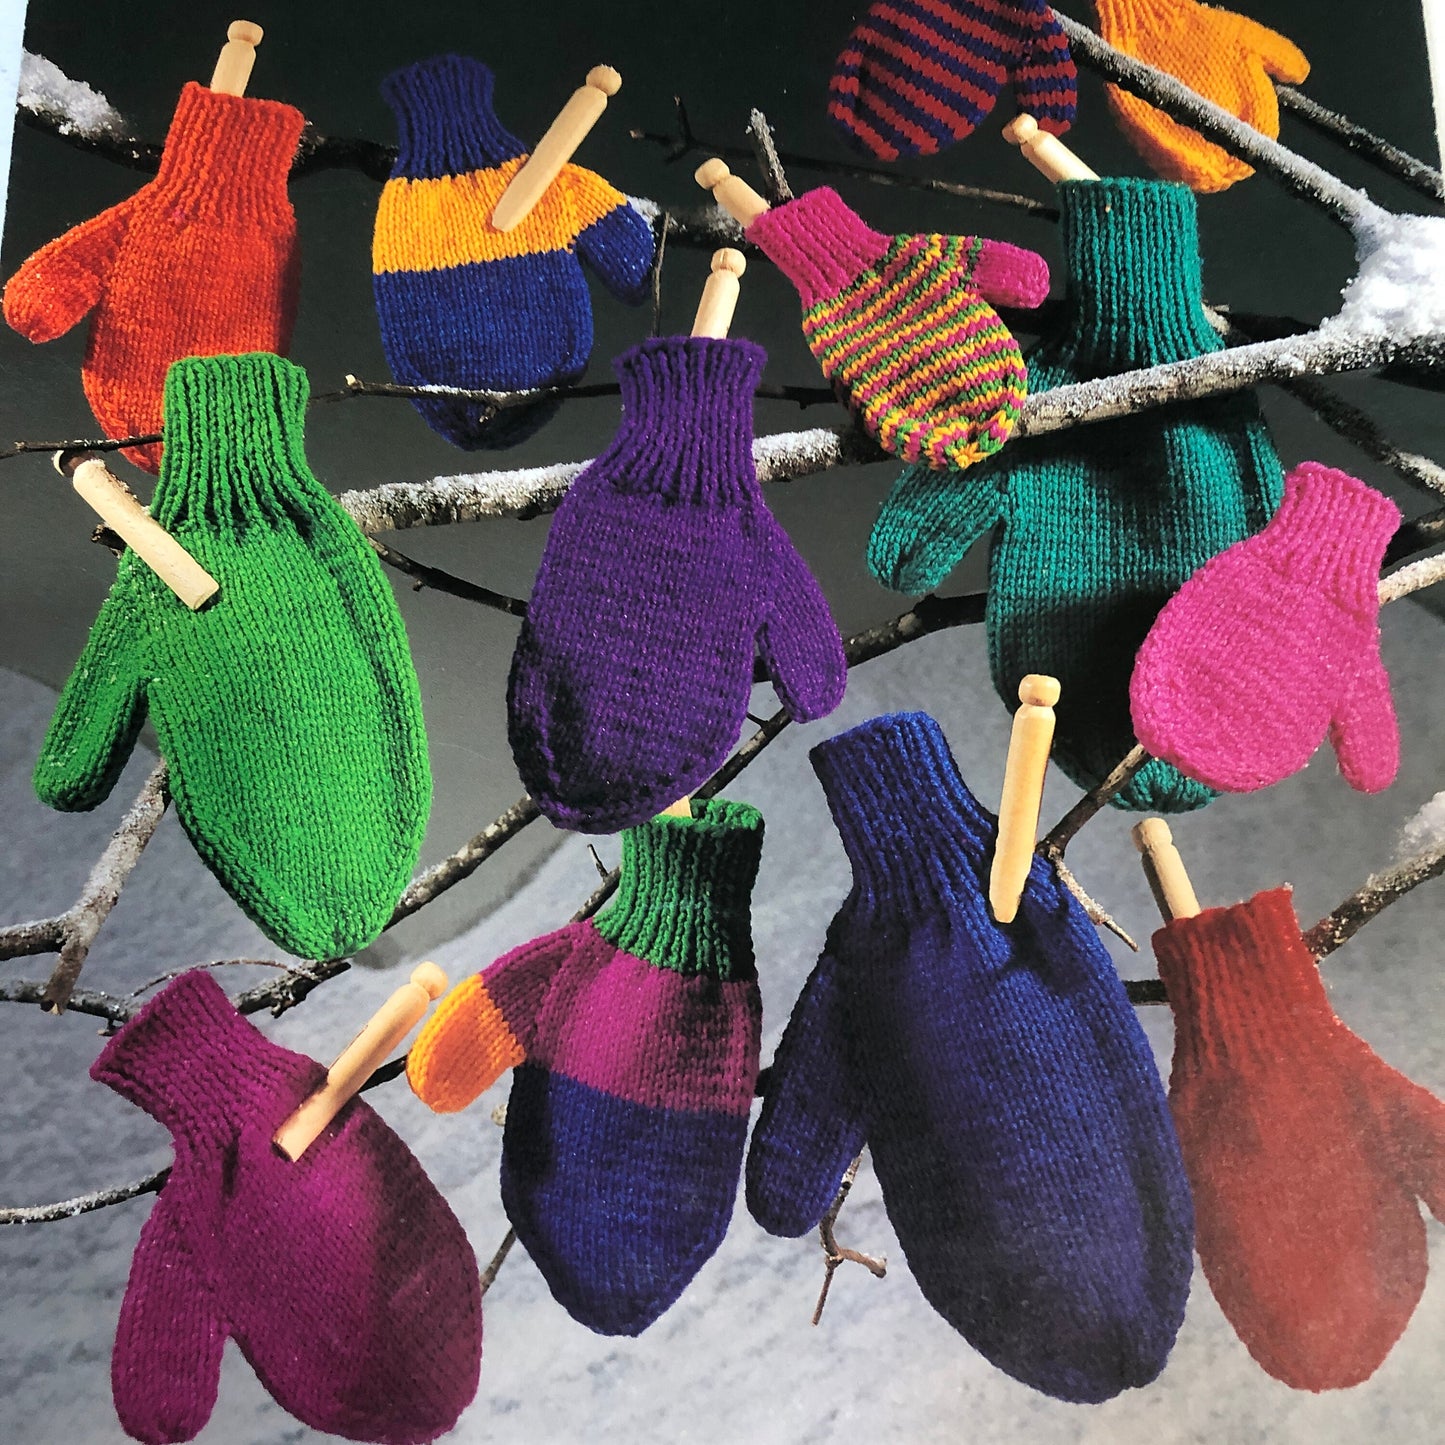 Leisure Arts, Many Mittens, Mary Lamb Becker, Vintage 1993 Knitting Leaflet 2473